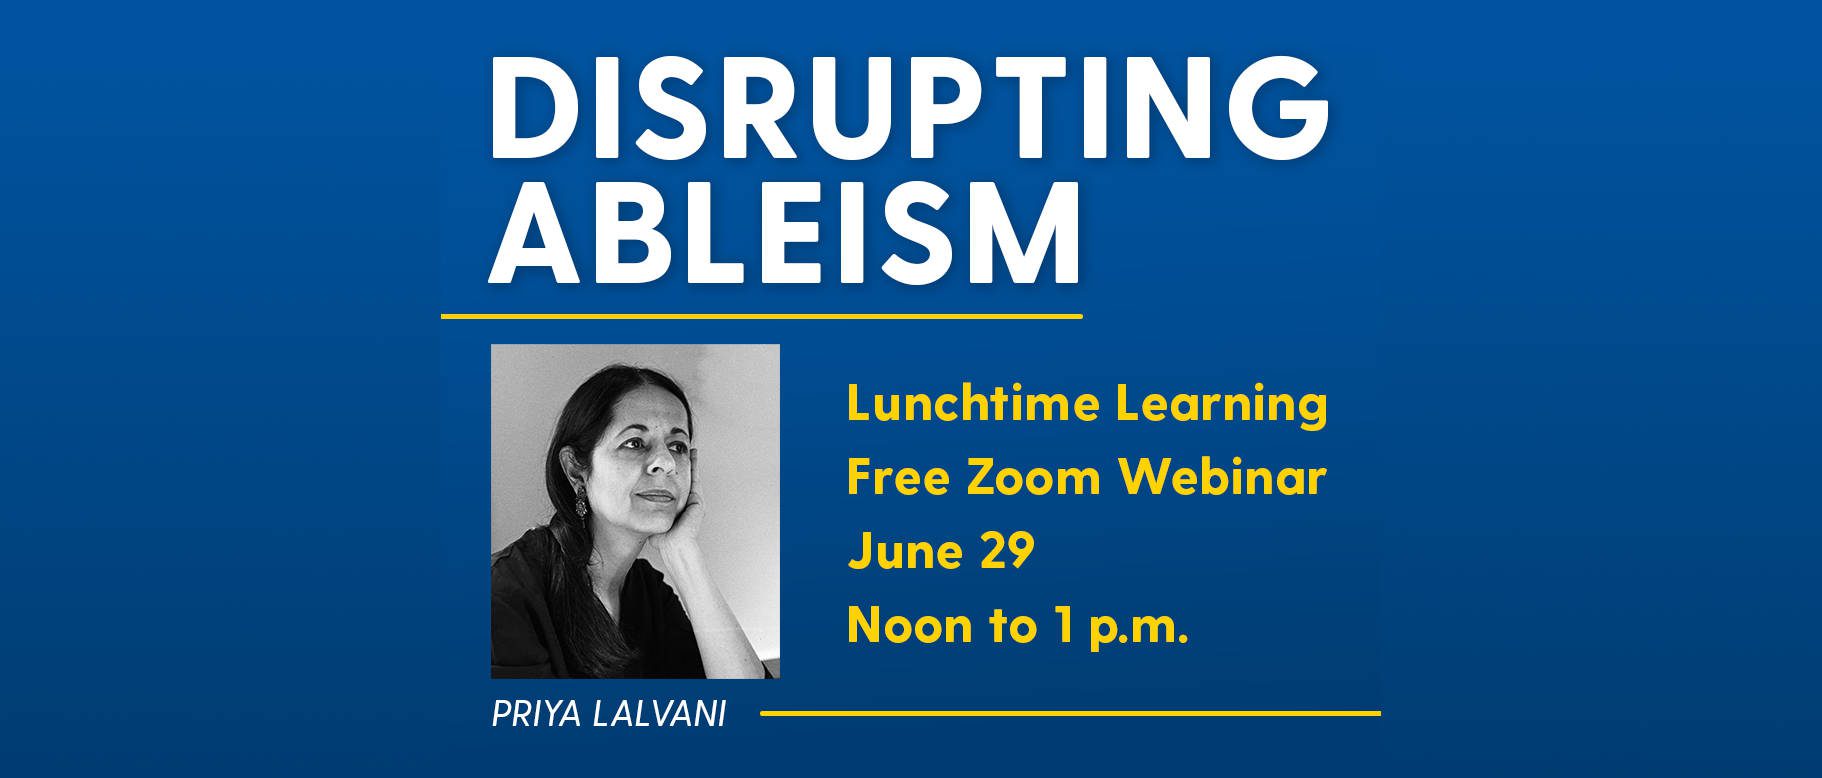 Disrupting Ableism Lunchtime Learning Zoom Webinar June 29 noon-1. Click to register.